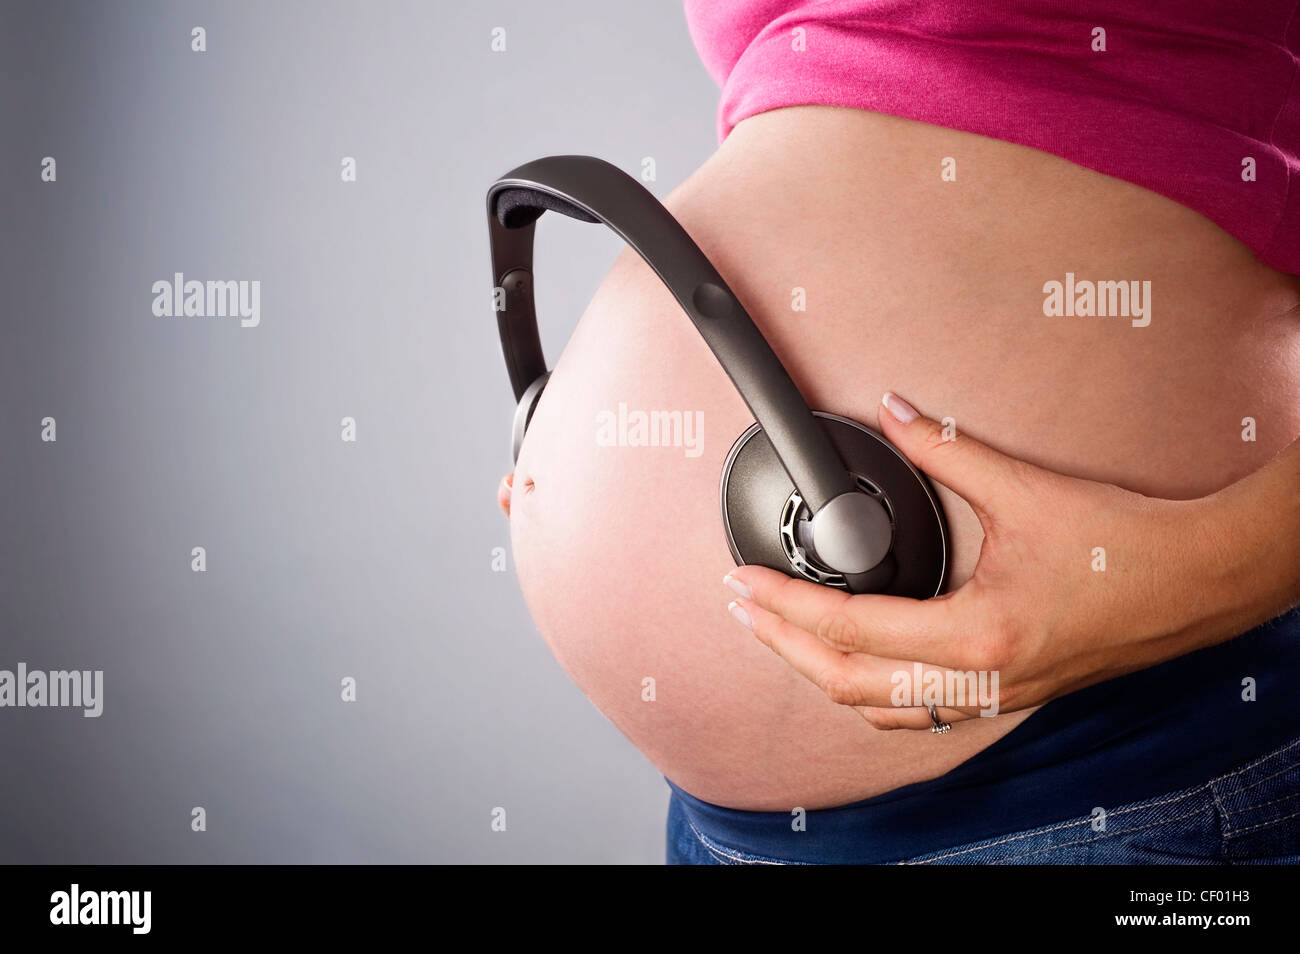 pregnant belly and earphones over gray background Stock Photo